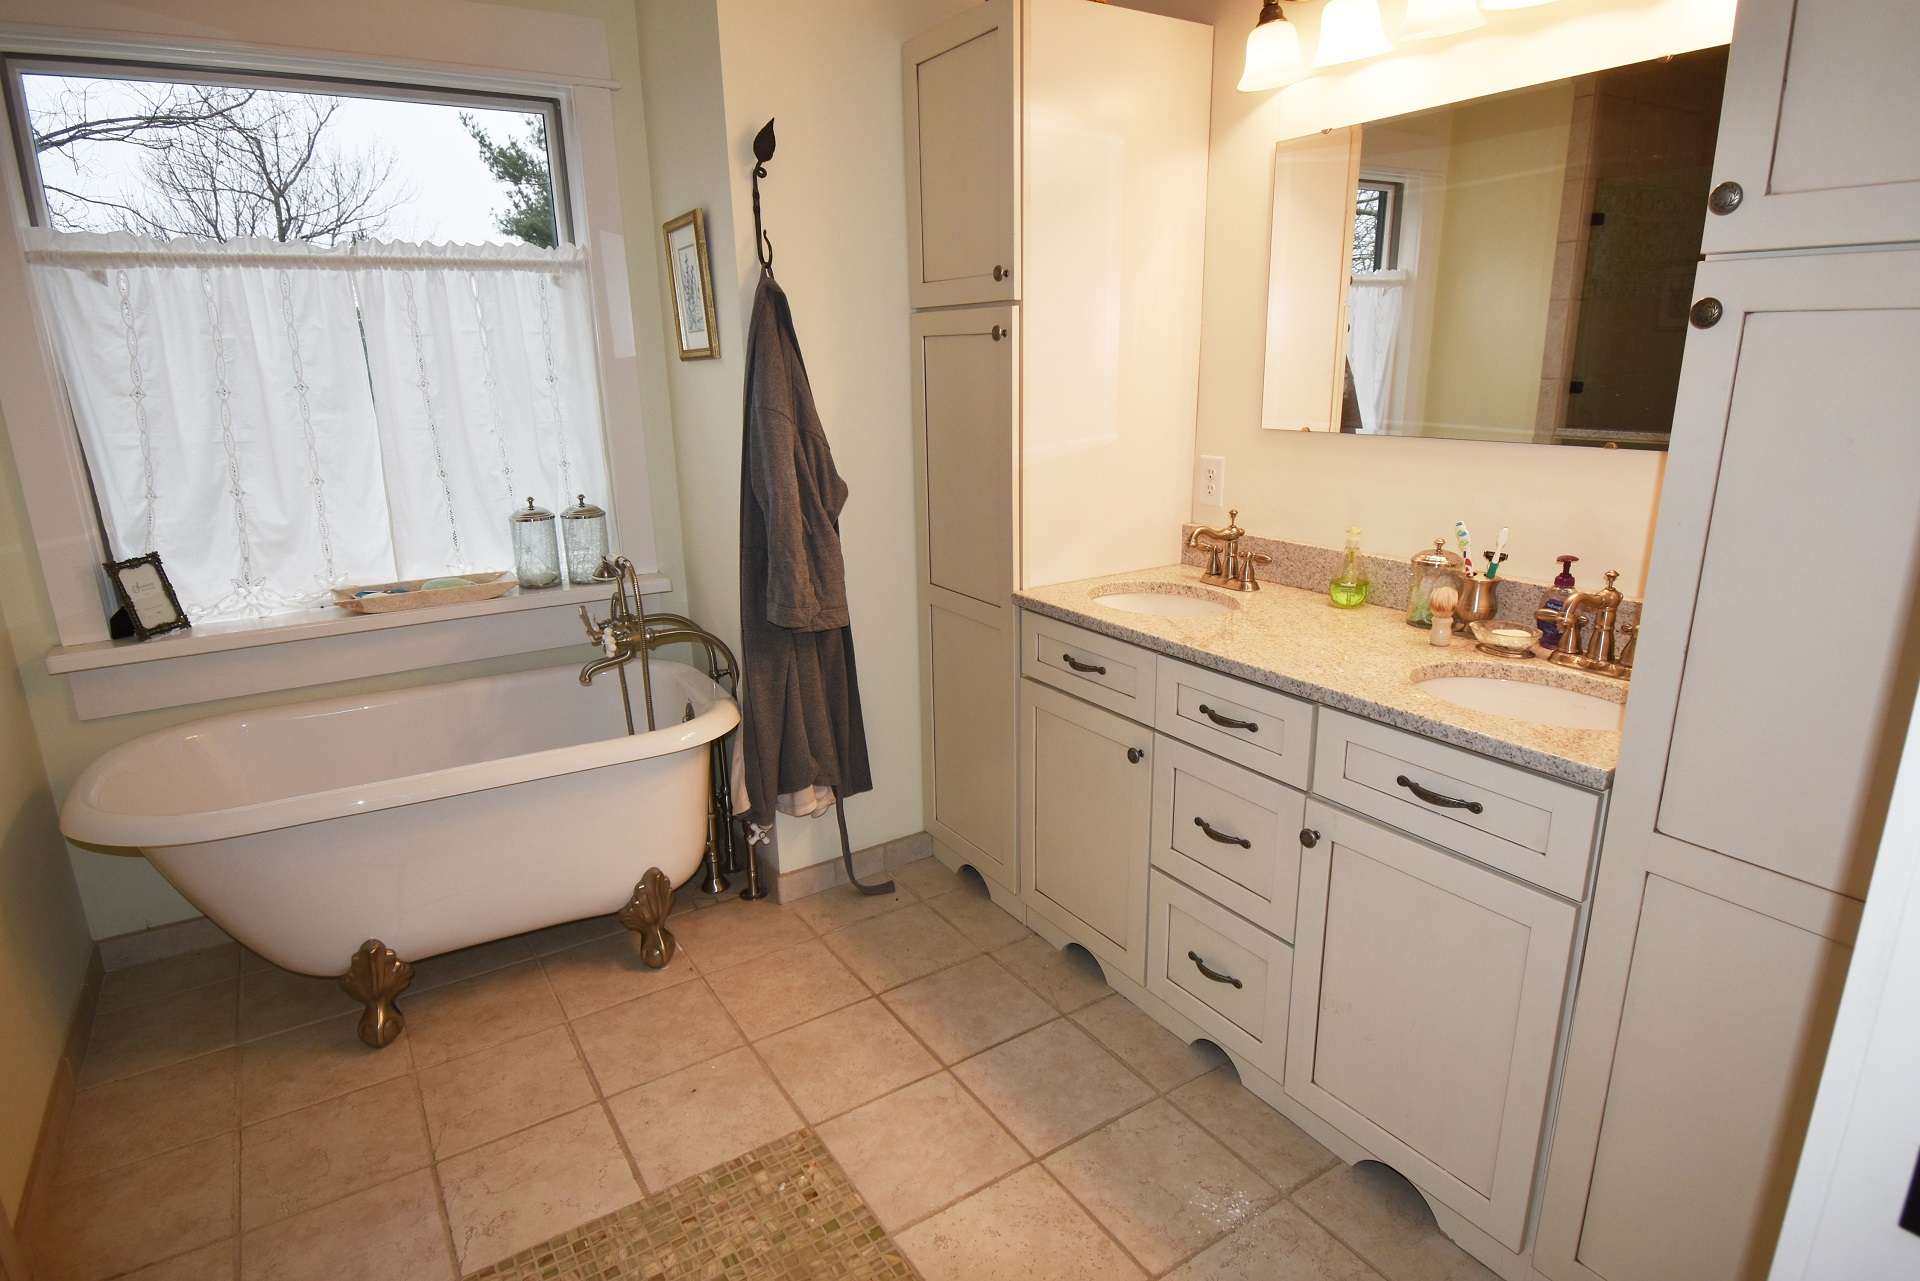 The master bath offers a double vanity, claw foot tub, separate tiled shower and radiant heated floor.